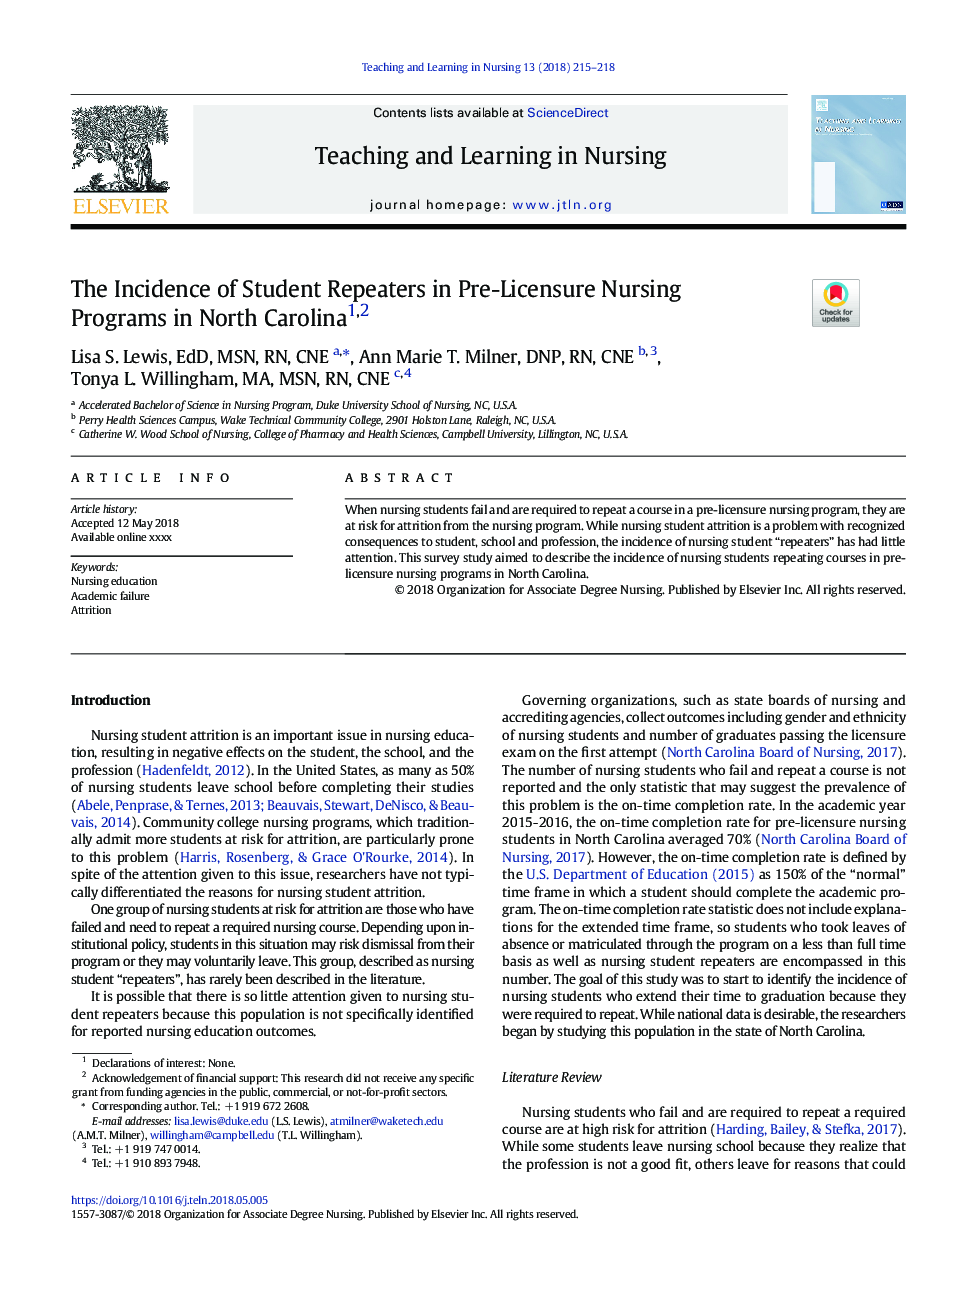 The Incidence of Student Repeaters in Pre-Licensure Nursing Programs in North Carolina